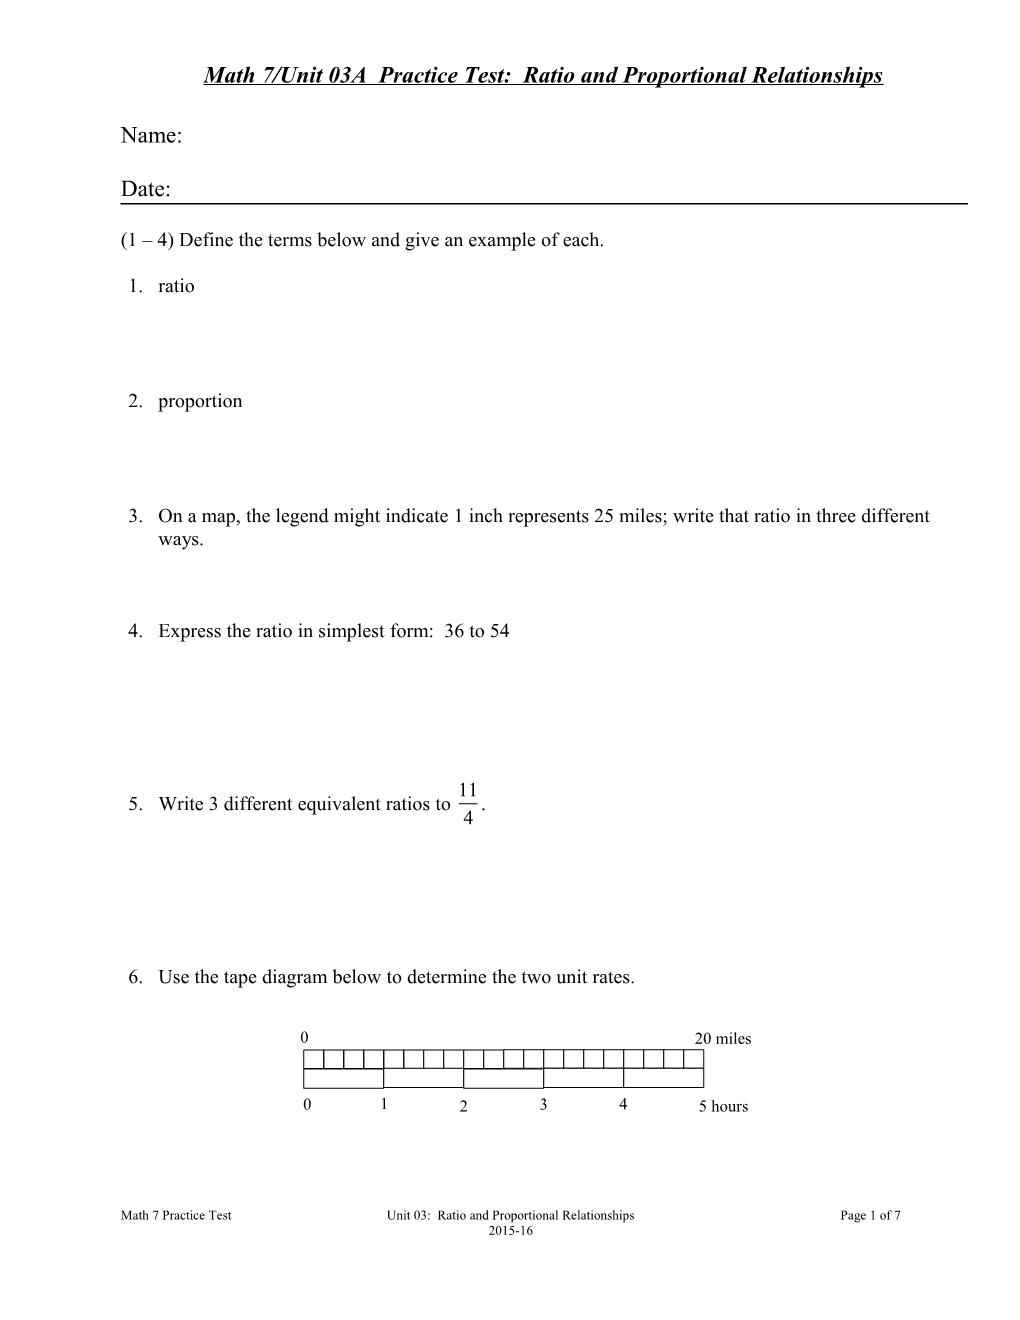 Math 7/Unit 03A Practice Test: Ratio and Proportional Relationships